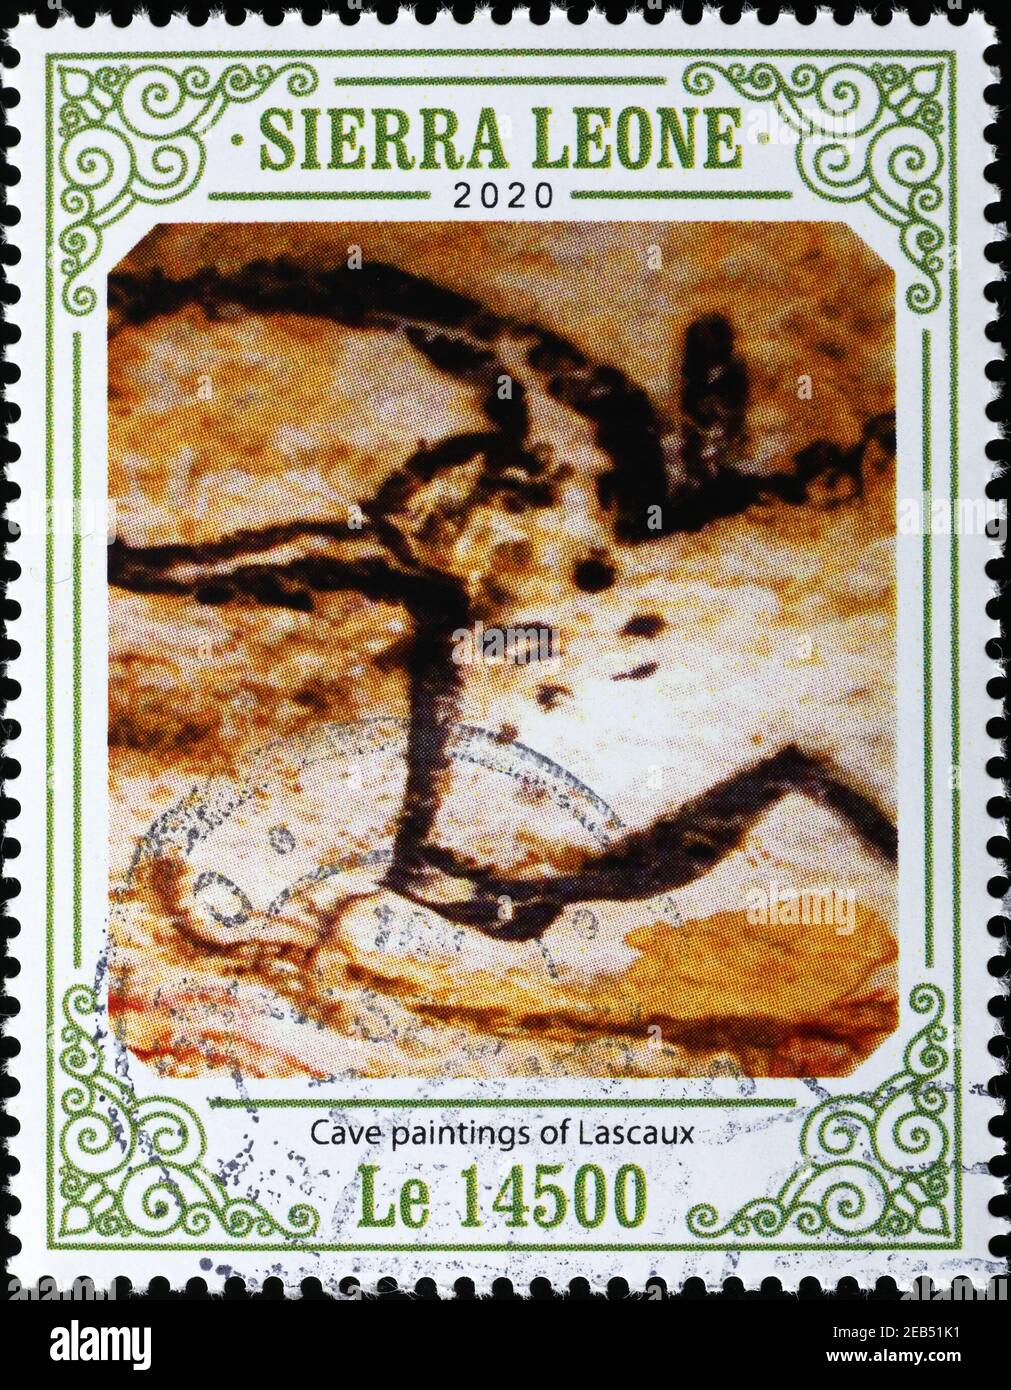 Aurochs in cave paintings of Lascaux on postage stamp Stock Photo